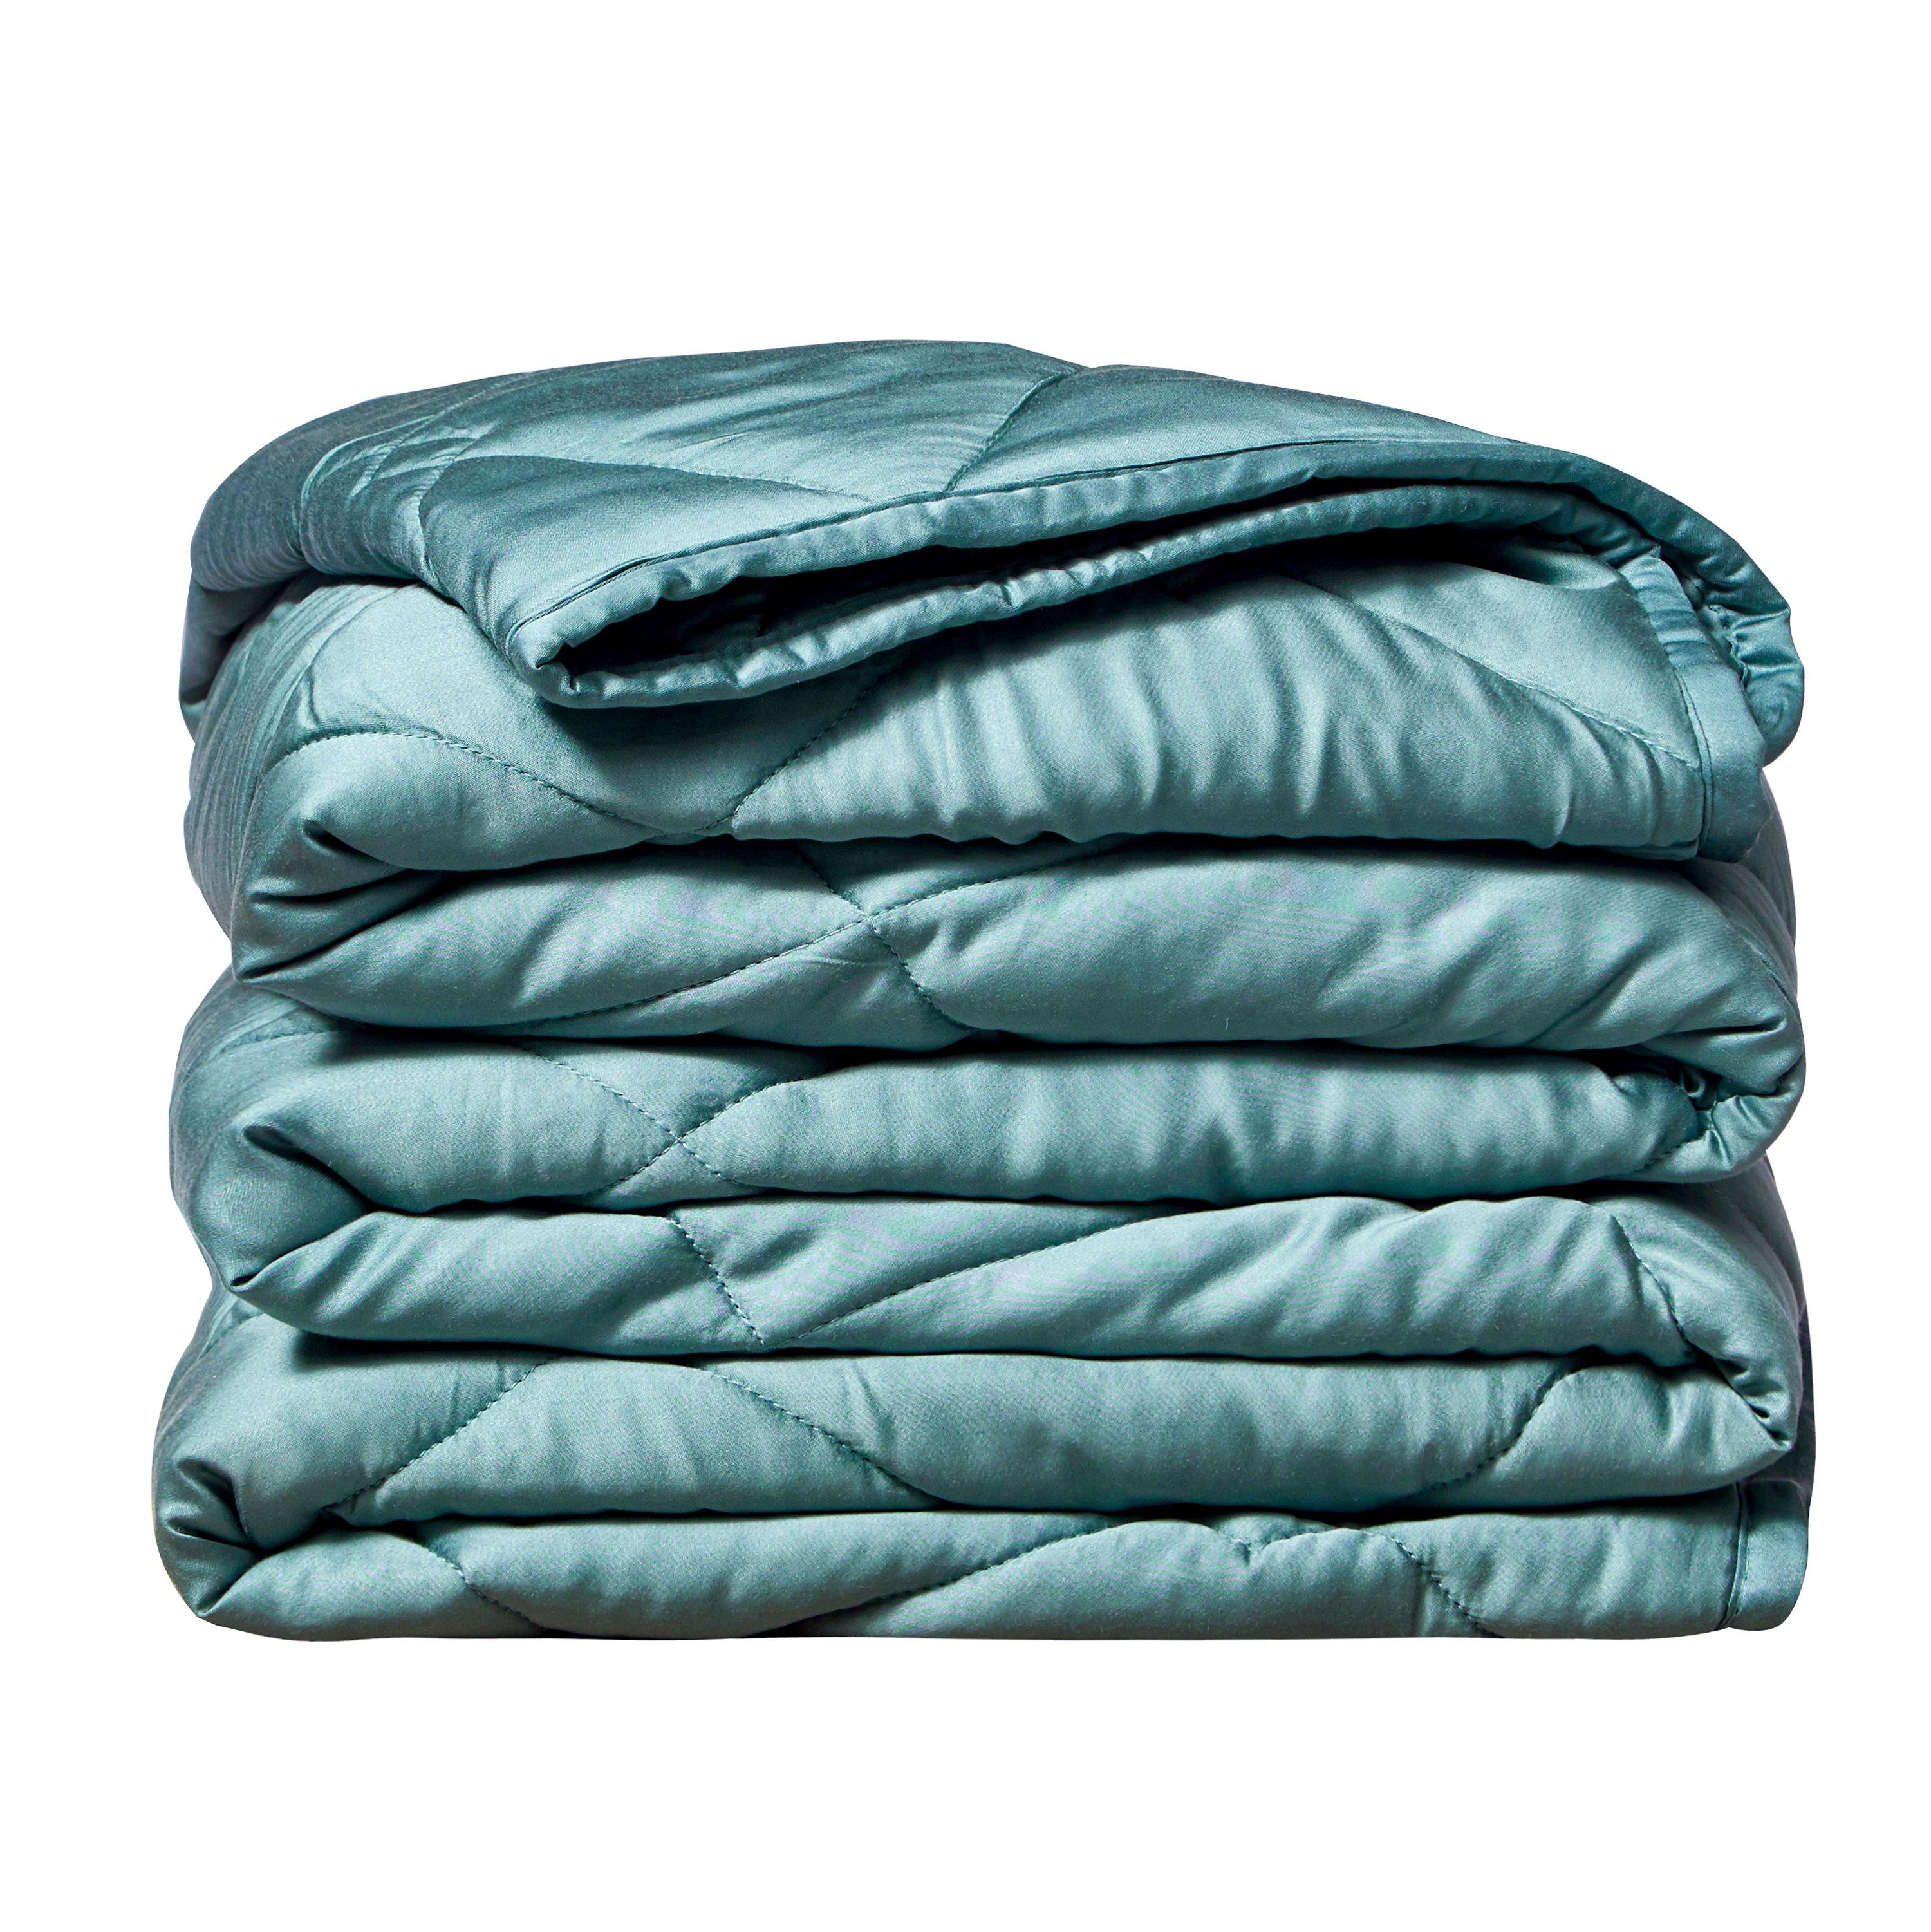 Rejuve Breathable Bamboo 15 lb Weighted Throw Blanket